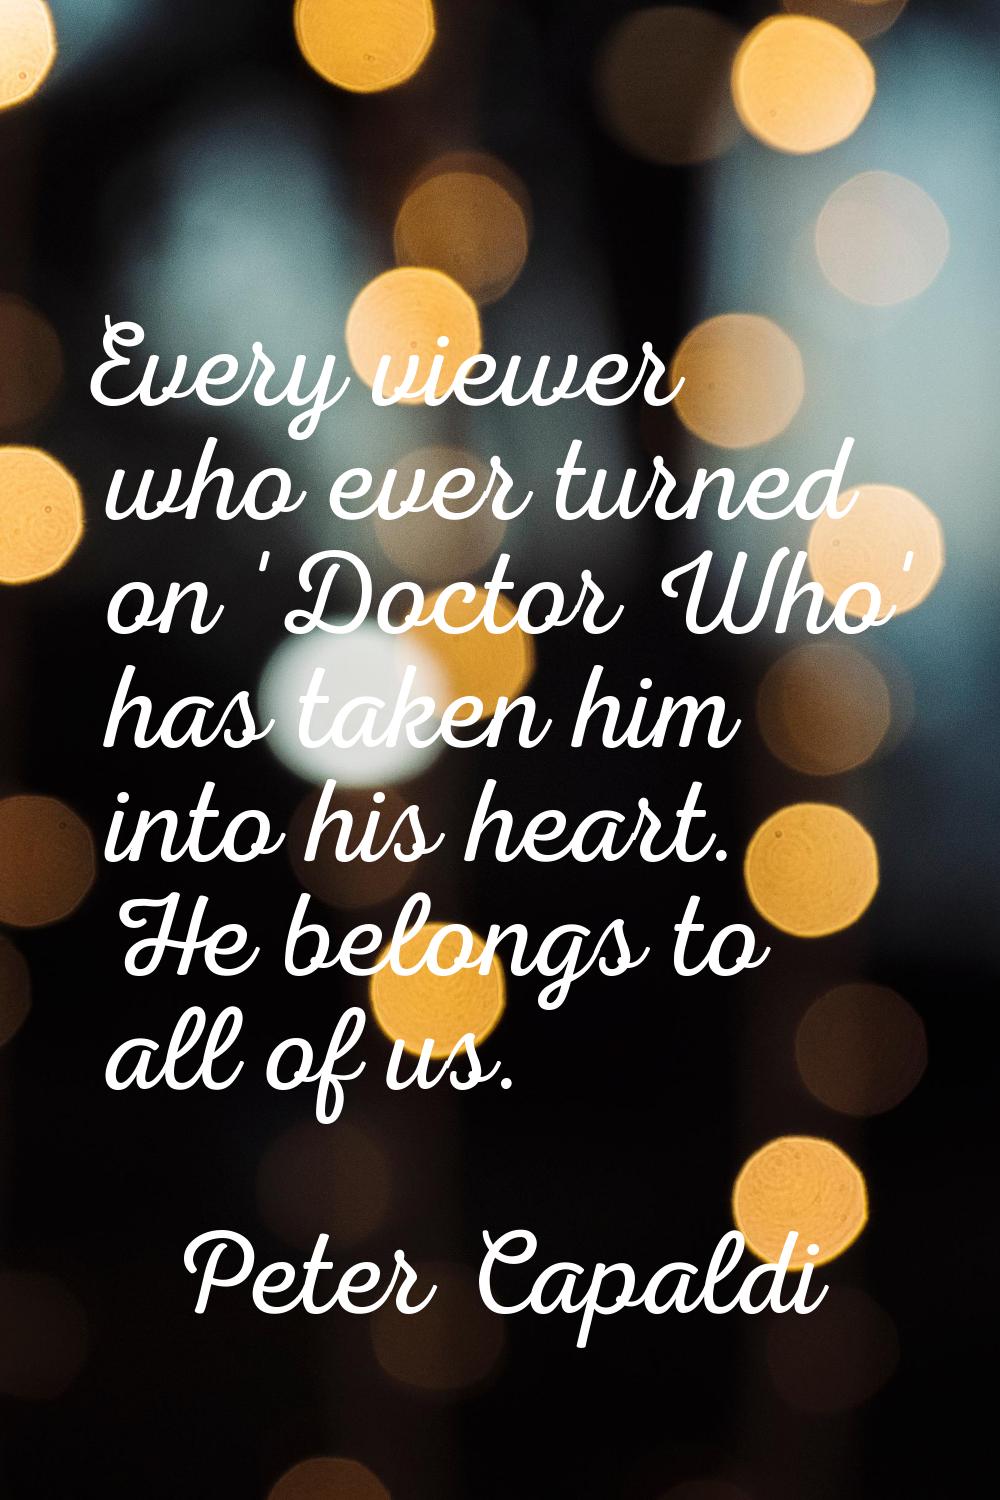 Every viewer who ever turned on 'Doctor Who' has taken him into his heart. He belongs to all of us.